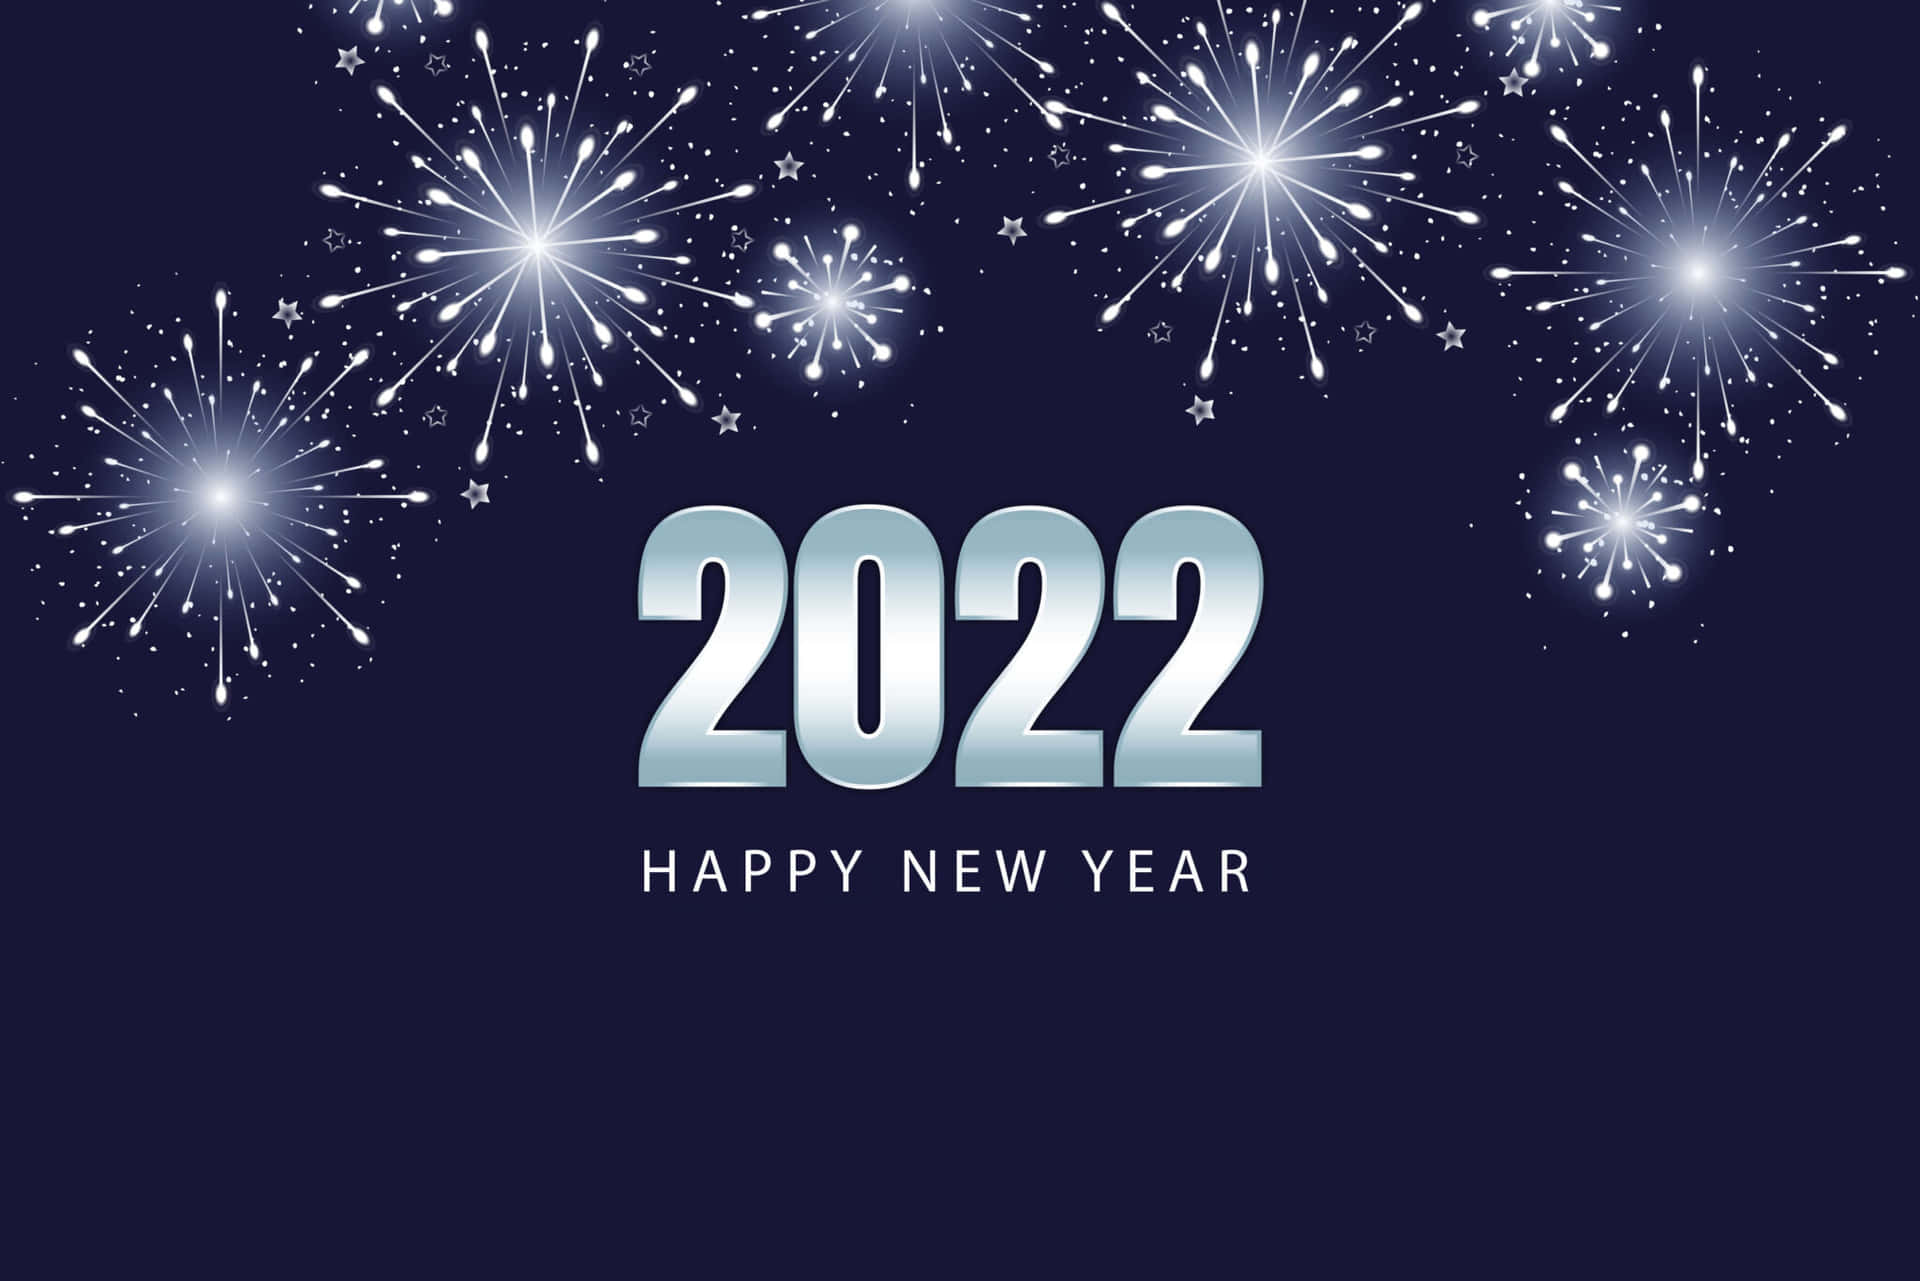 Happy New Year 2022 Pictures Wallpaper